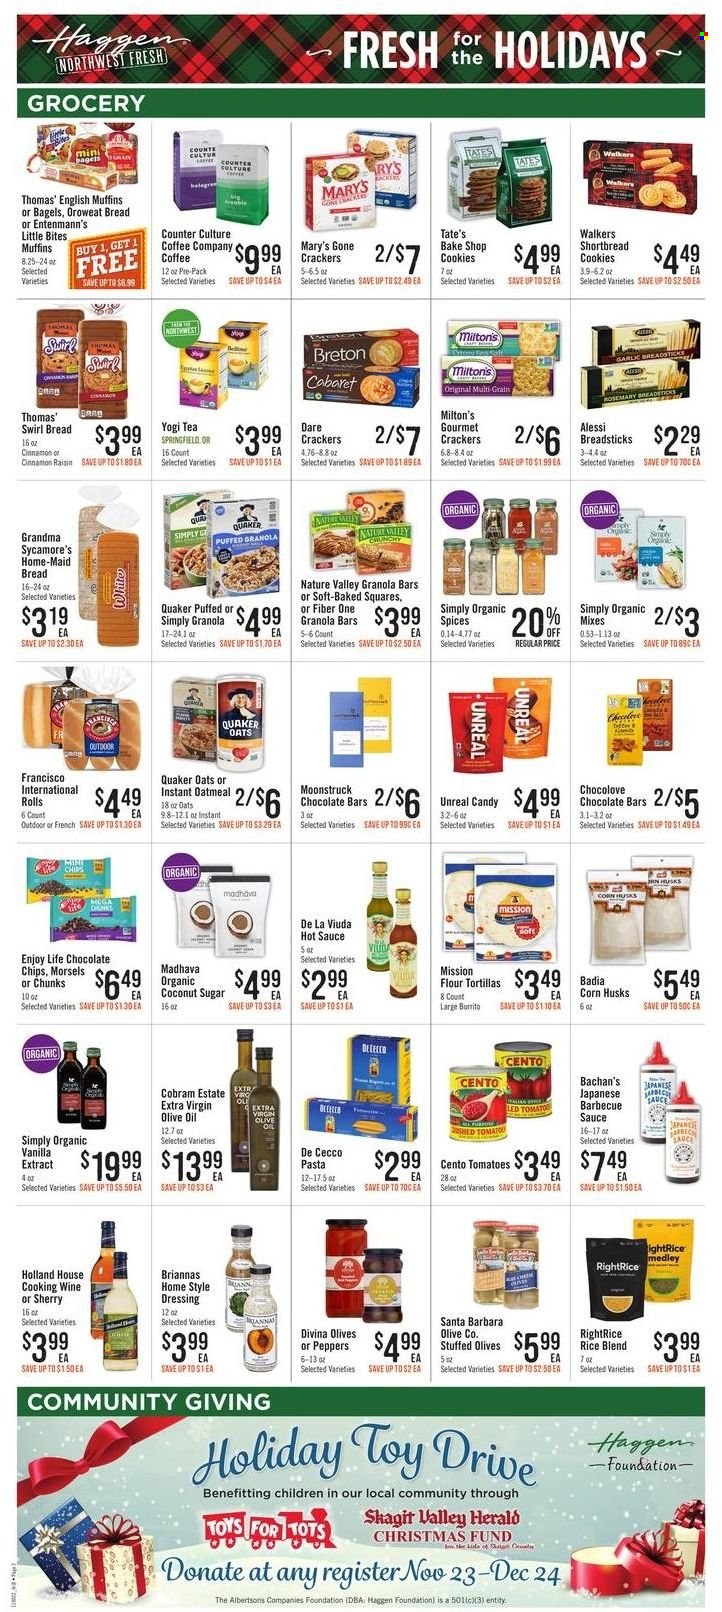 thumbnail - Haggen Flyer - 11/30/2022 - 12/13/2022 - Sales products - bagels, bread, english muffins, tortillas, flour tortillas, Entenmann's, corn, tomatoes, peppers, coconut, pasta, sauce, burrito, Quaker, cookies, crackers, Santa, Little Bites, chocolate bar, bread sticks, sugar, oatmeal, oats, coconut sugar, vanilla extract, olives, Badia, granola bar, Nature Valley, Fiber One, rice, rosemary, BBQ sauce, hot sauce, dressing, extra virgin olive oil, olive oil, oil, tea, coffee, cooking wine, sherry. Page 2.